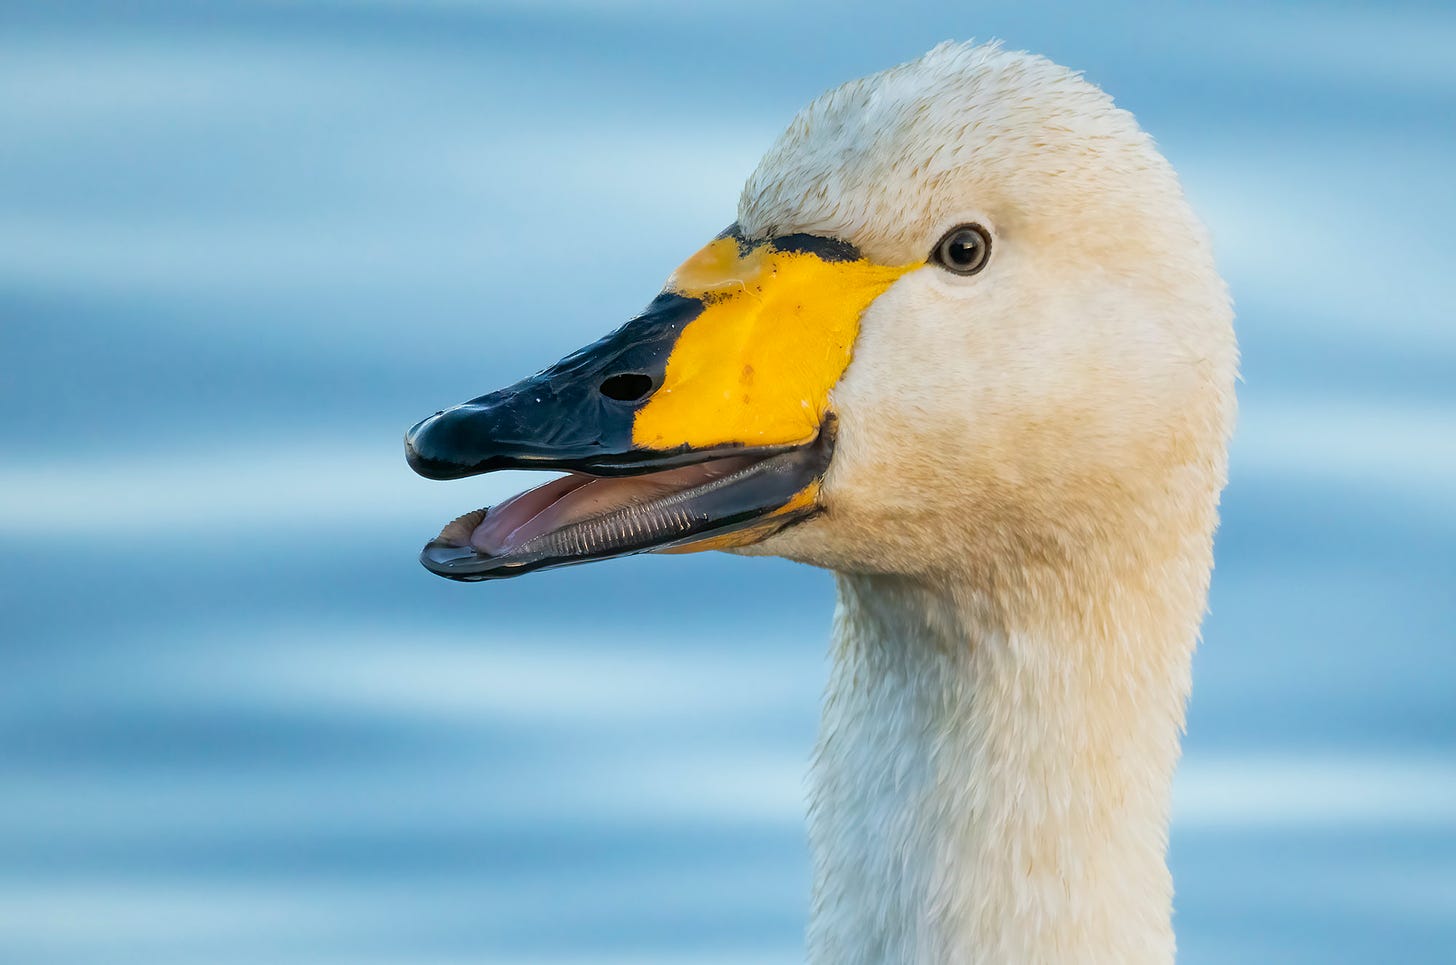 Photo of a whooper swan with its beak open